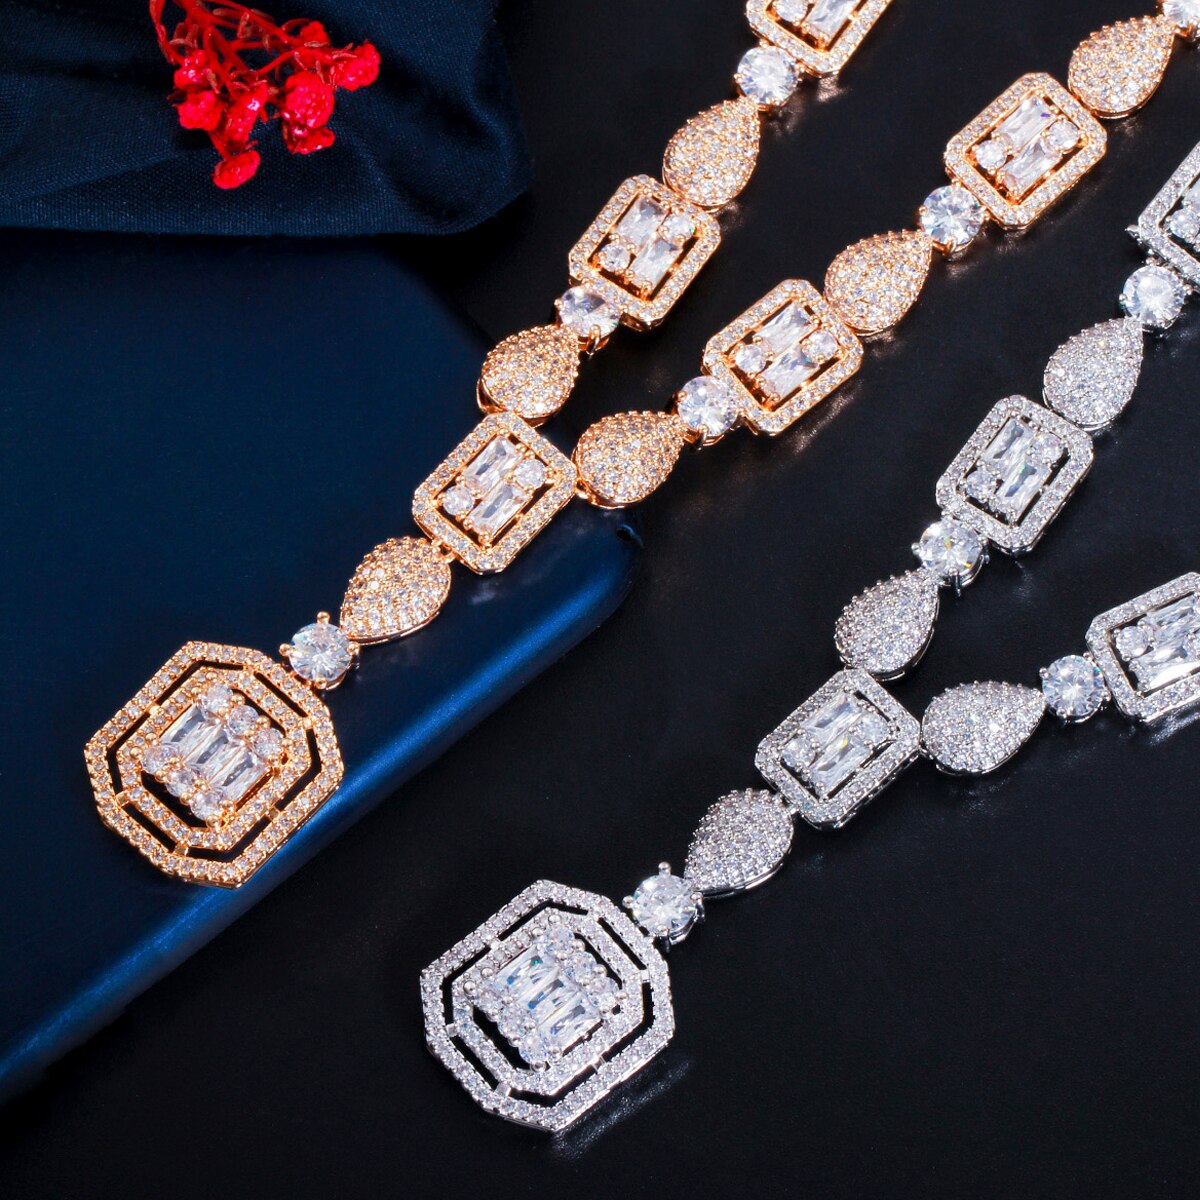 ThreeGraces-Elegant-Bridal-Wedding-Square-Necklace-Earrings-Sets-White-CZ-Crystal-Silver-Color-India-1005001616553168-9